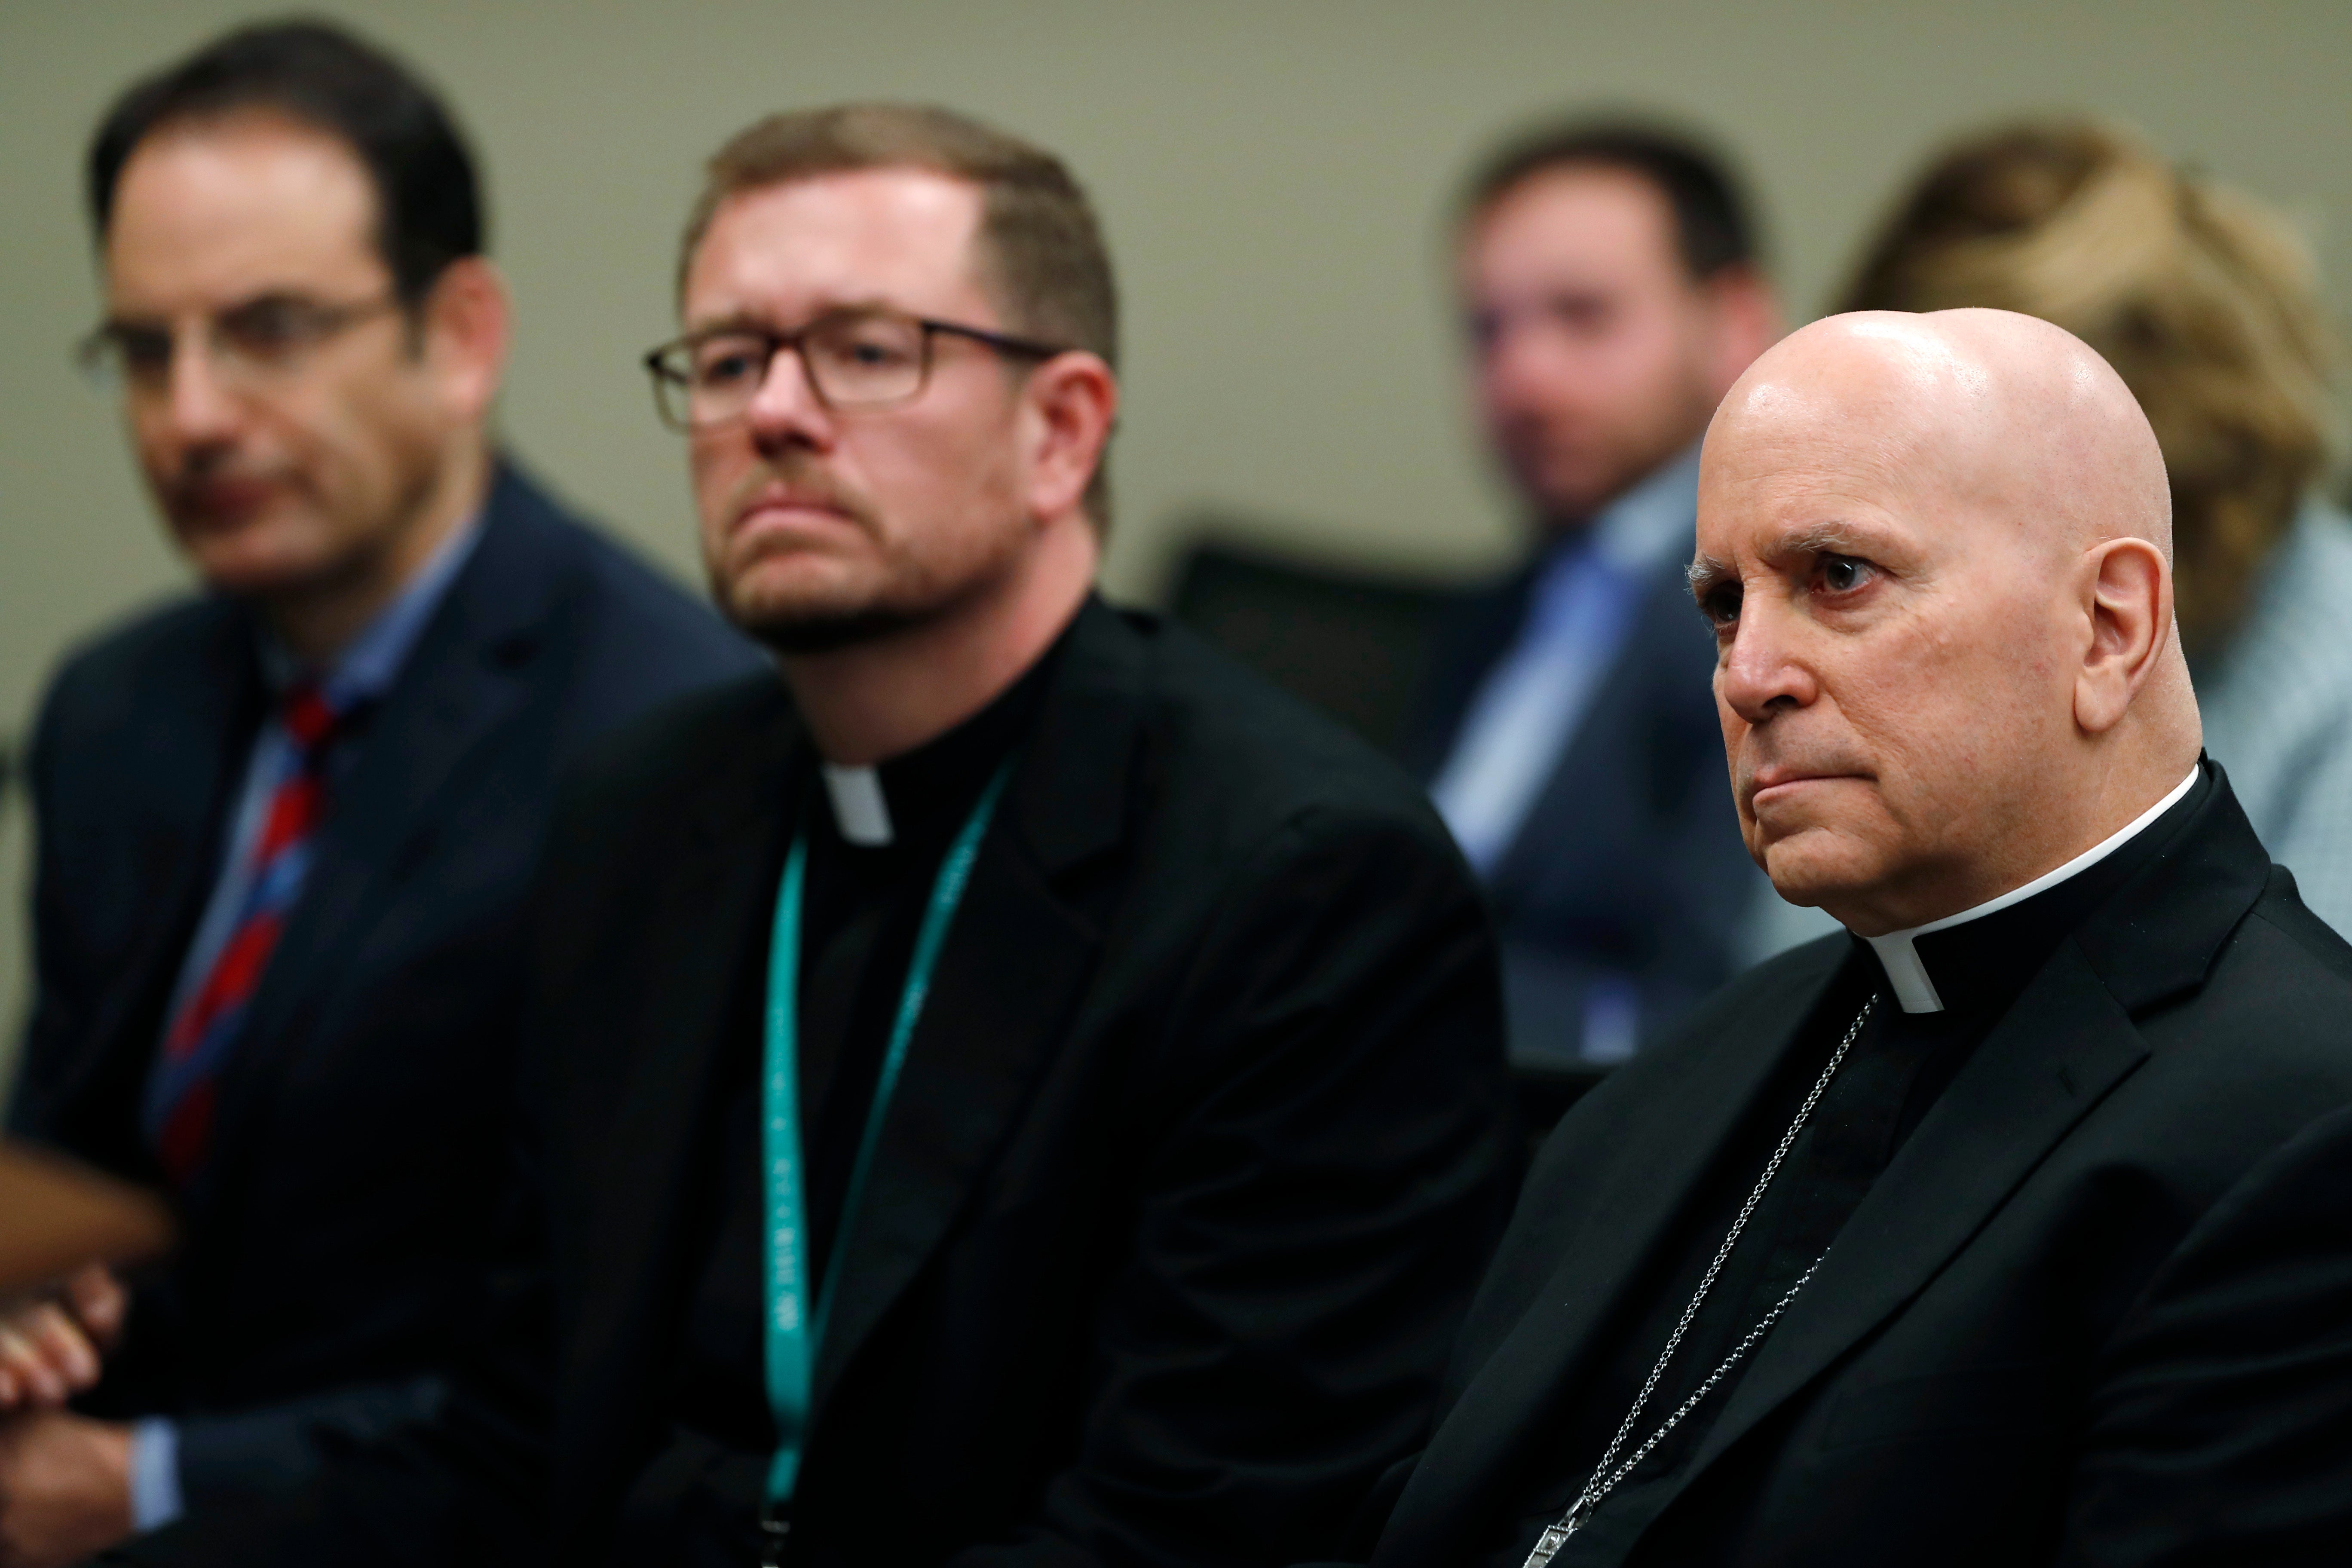 9 New Catholic Priests Named In Colorado Sex Abuse Report Priests